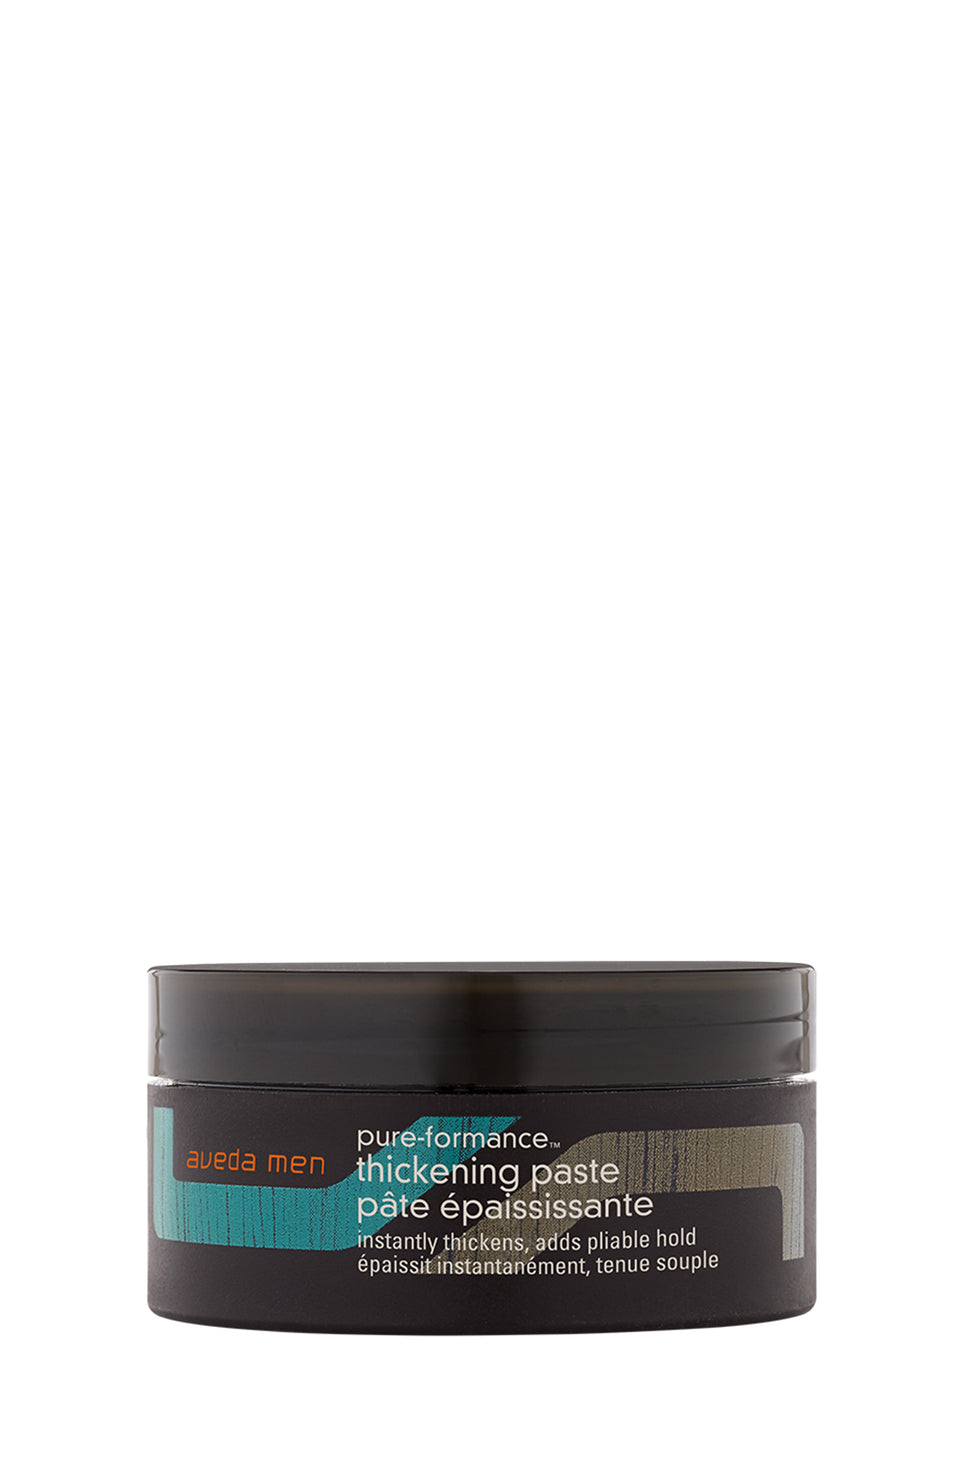 Mens Pure-formance Thickening Paste